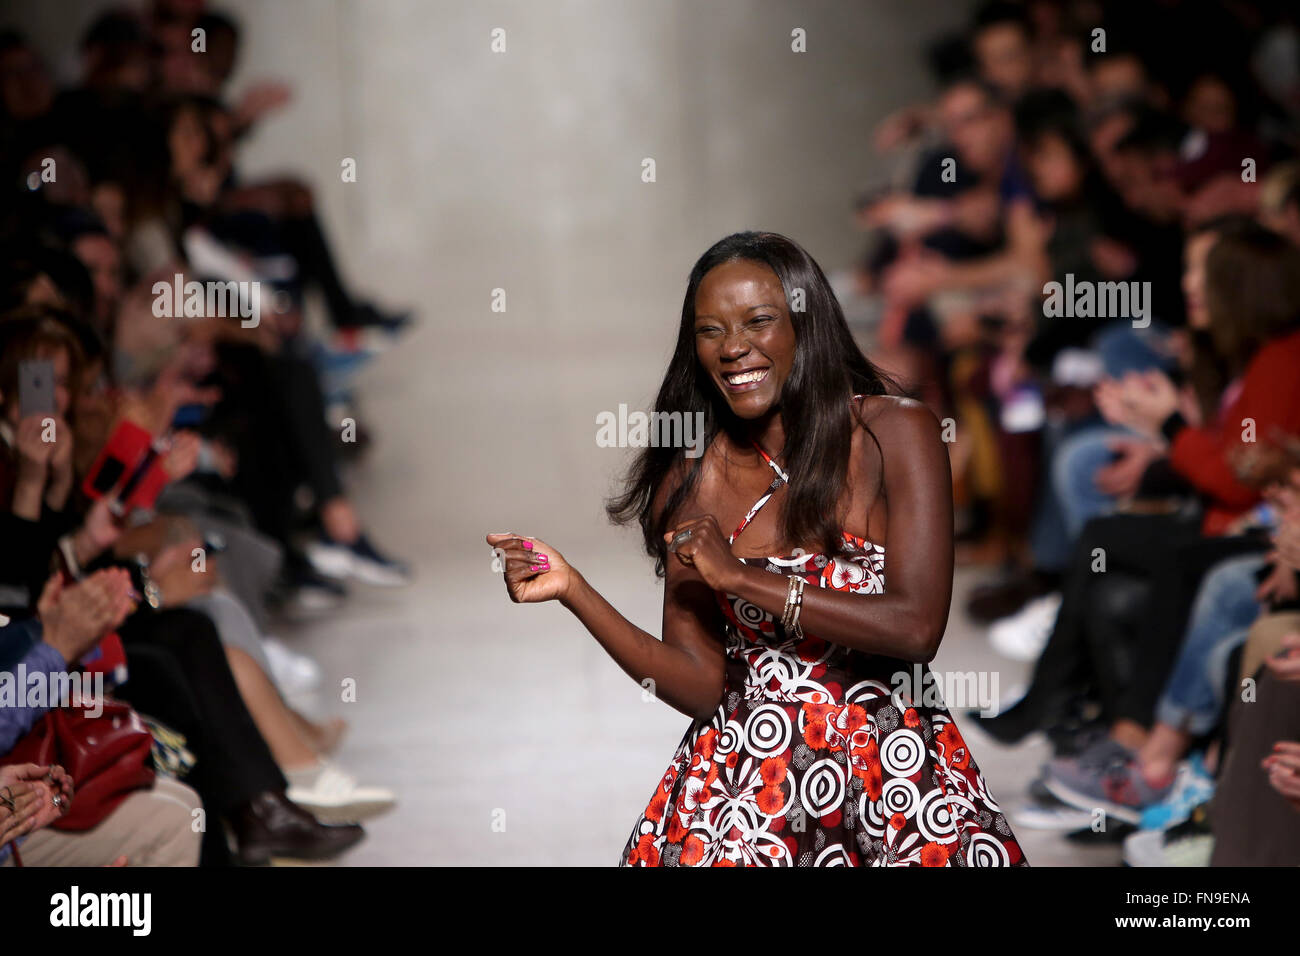 March 13, 2016 - Lisbon, Portugal - Angolan fashion designer Nadir Tati acknowledges cheers after presenting the Fall/Winter 2016/2017 collection during the Lisbon Fashion Week on March 11, 2016 in Lisbon, Portugal. (Credit Image: © Pedro Fiuza via ZUMA Wire) Stock Photo